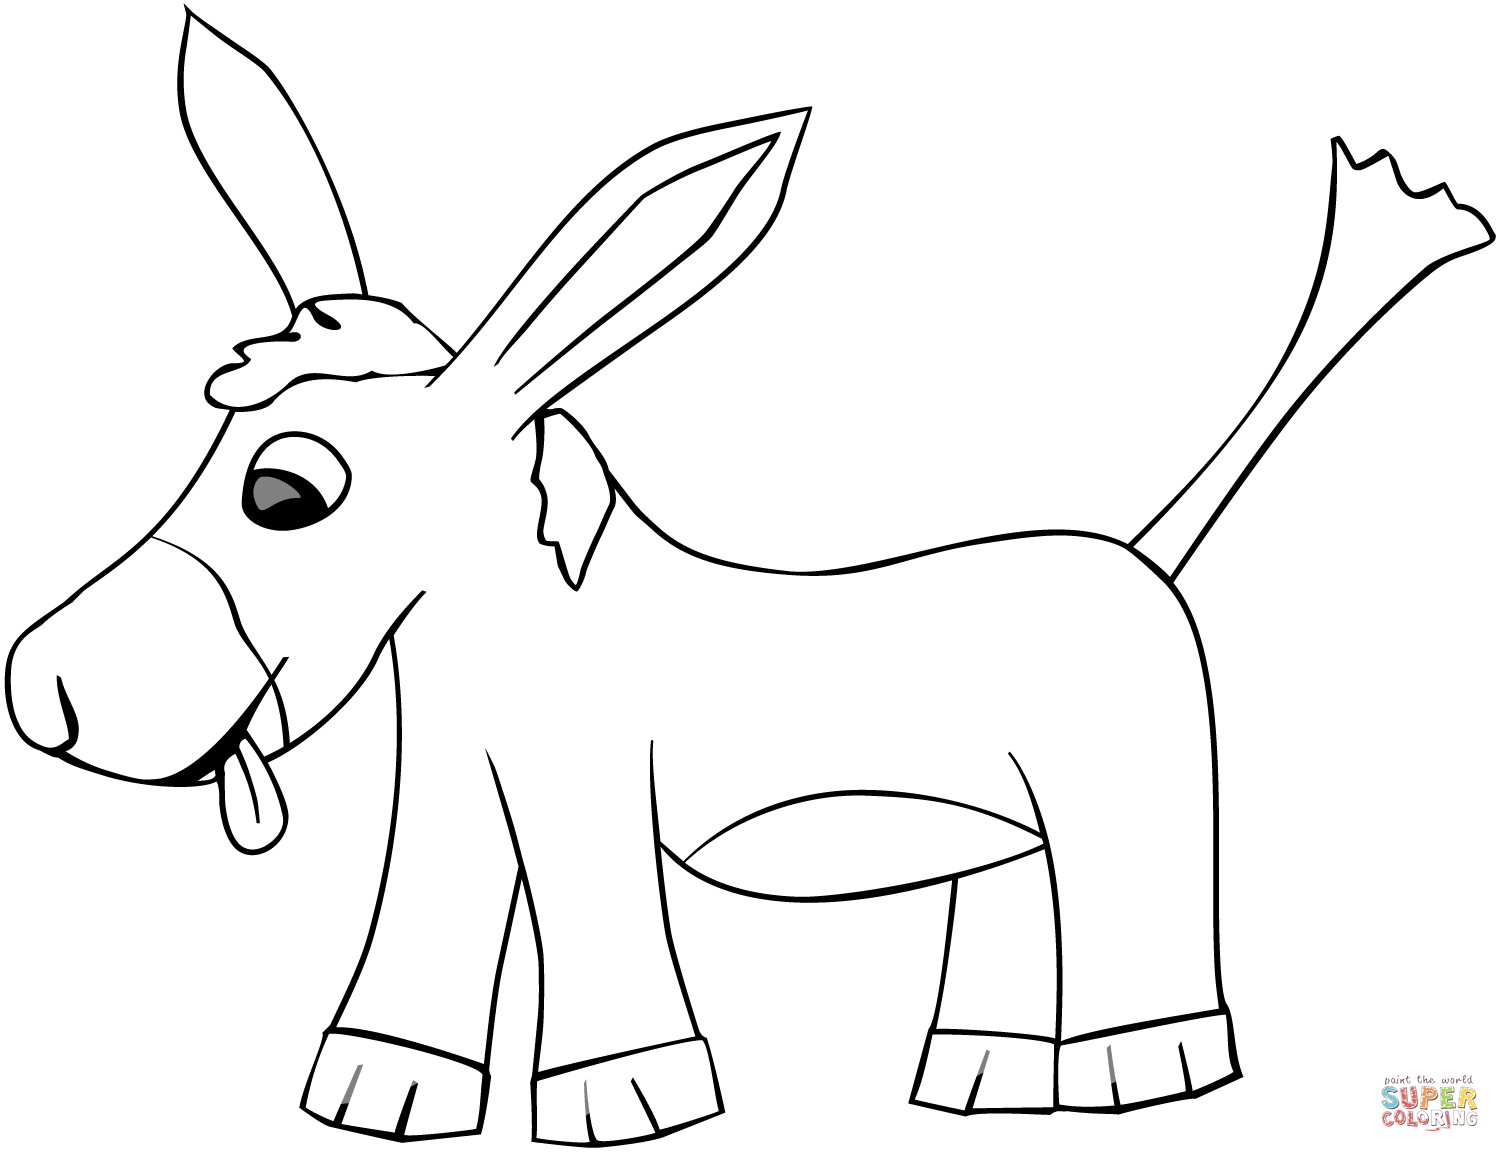 Donkey Coloring Page Cartoon Donkey Coloring Page Free Printable Coloring Pages